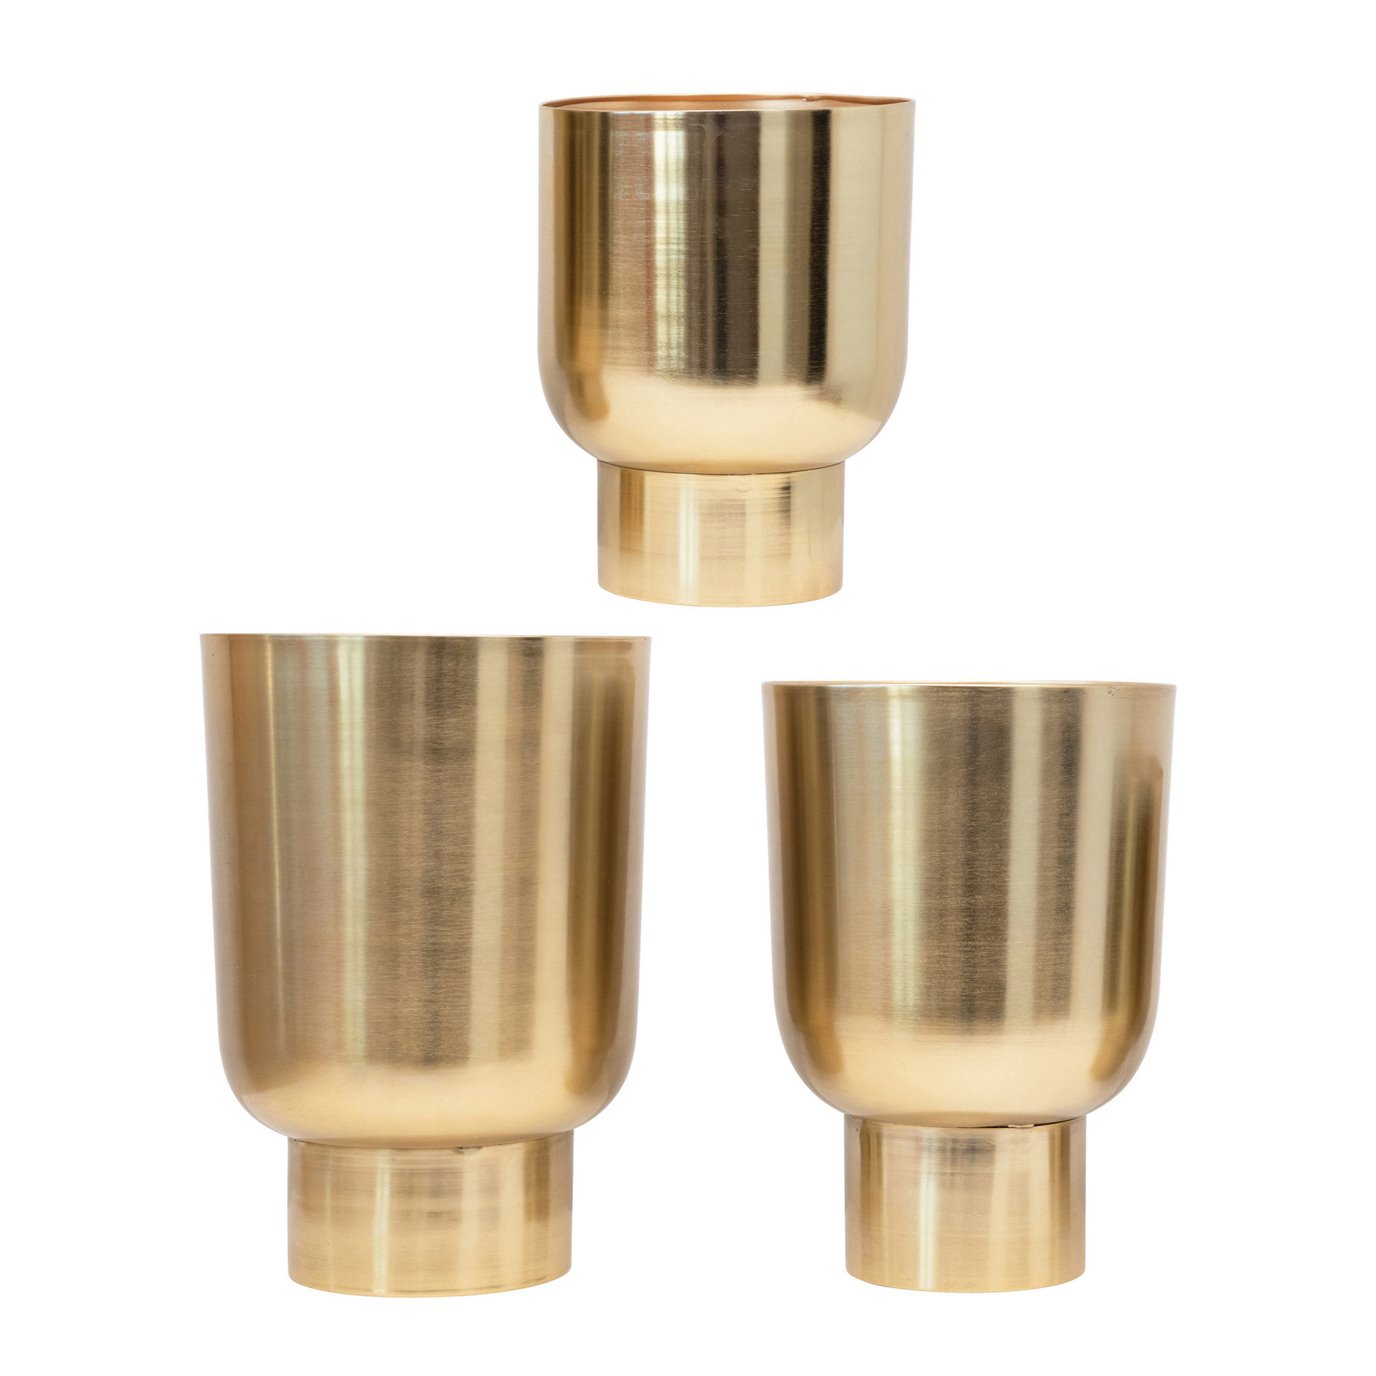 Metal Planters, Gold Finish, Set of 3 (Holds 10", 9" & 8" Pots)